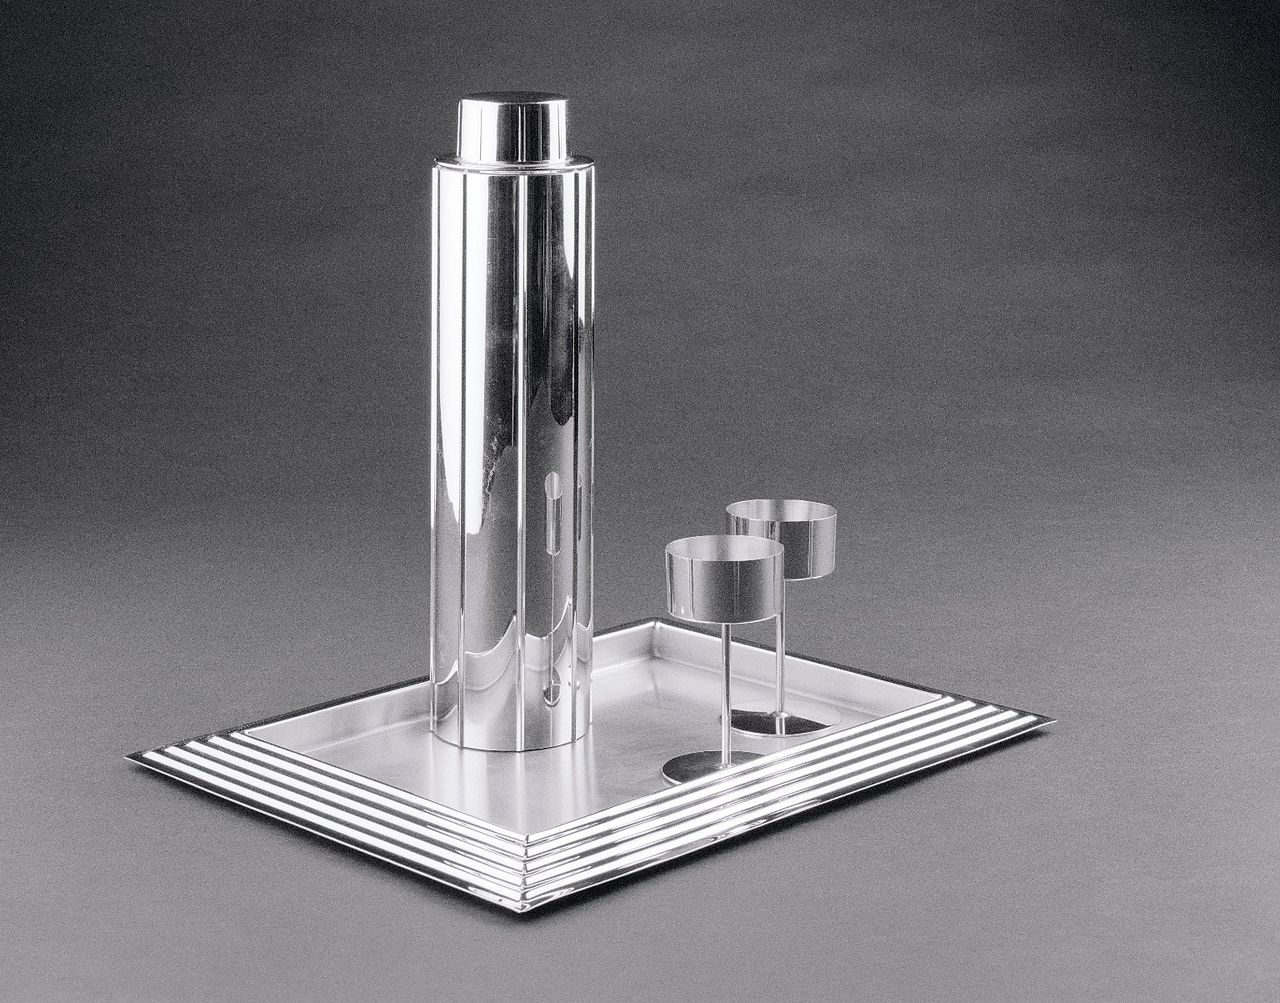 Cocktail set of chrome-plated steel by Norman Bel Geddes (1937)